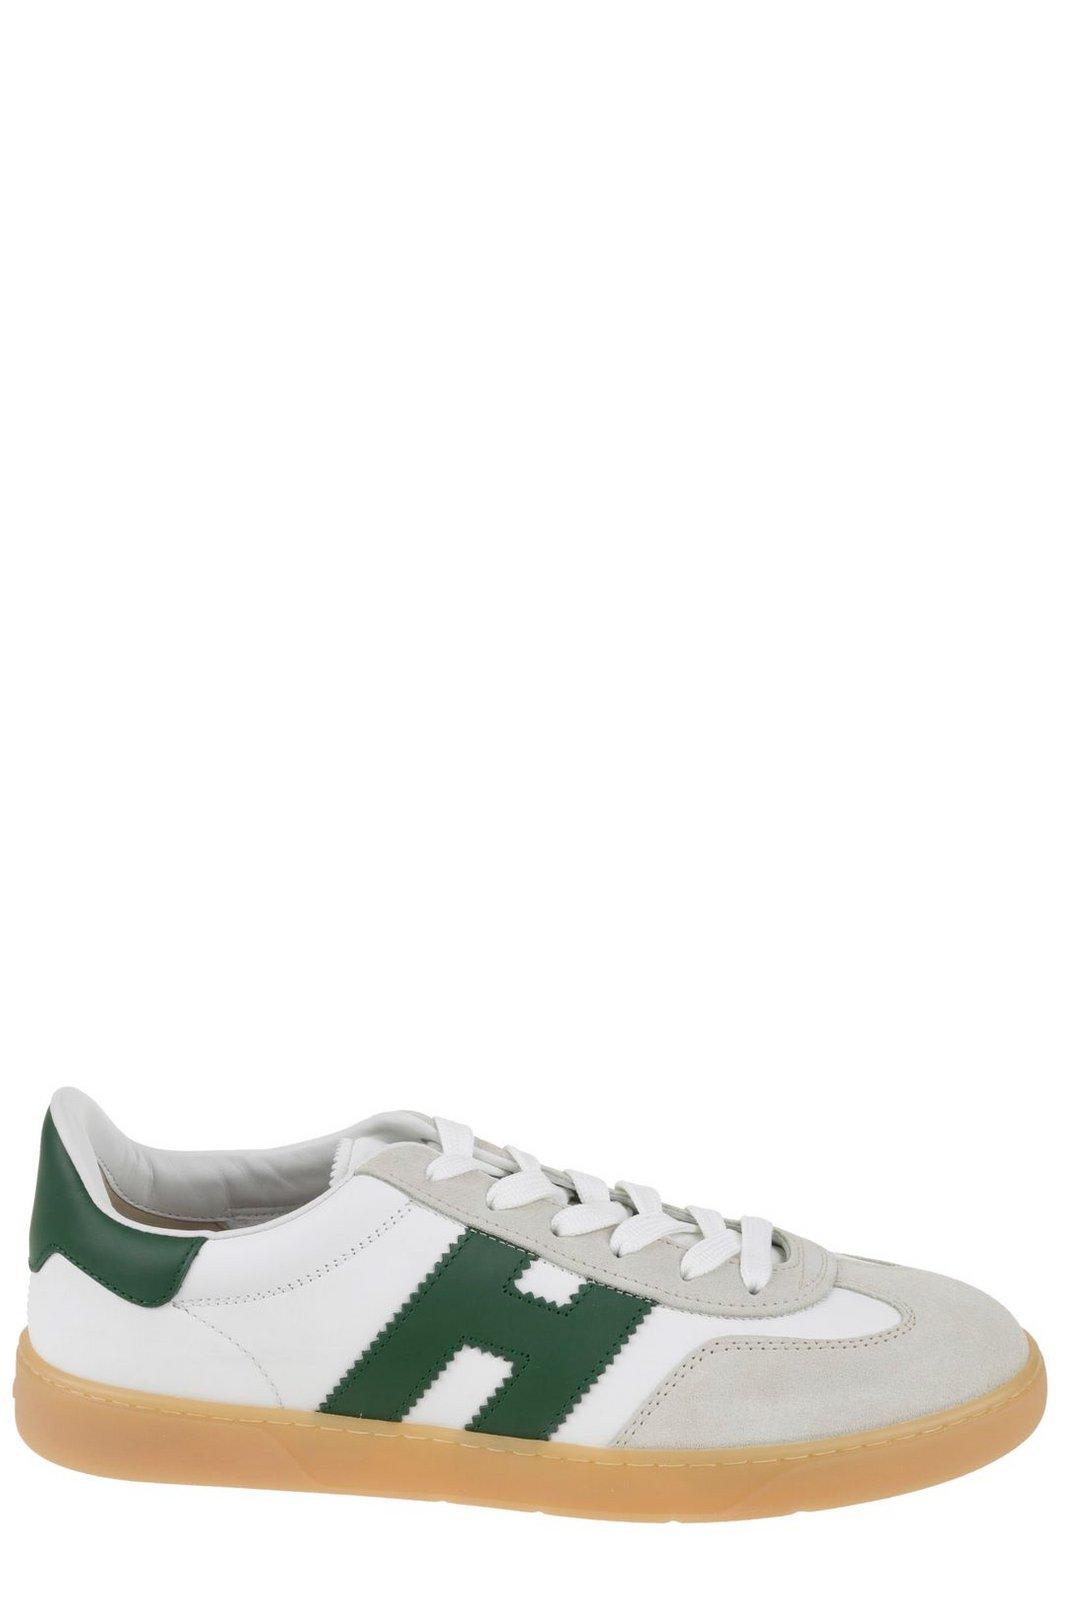 Cool Side H Patch Sneakers